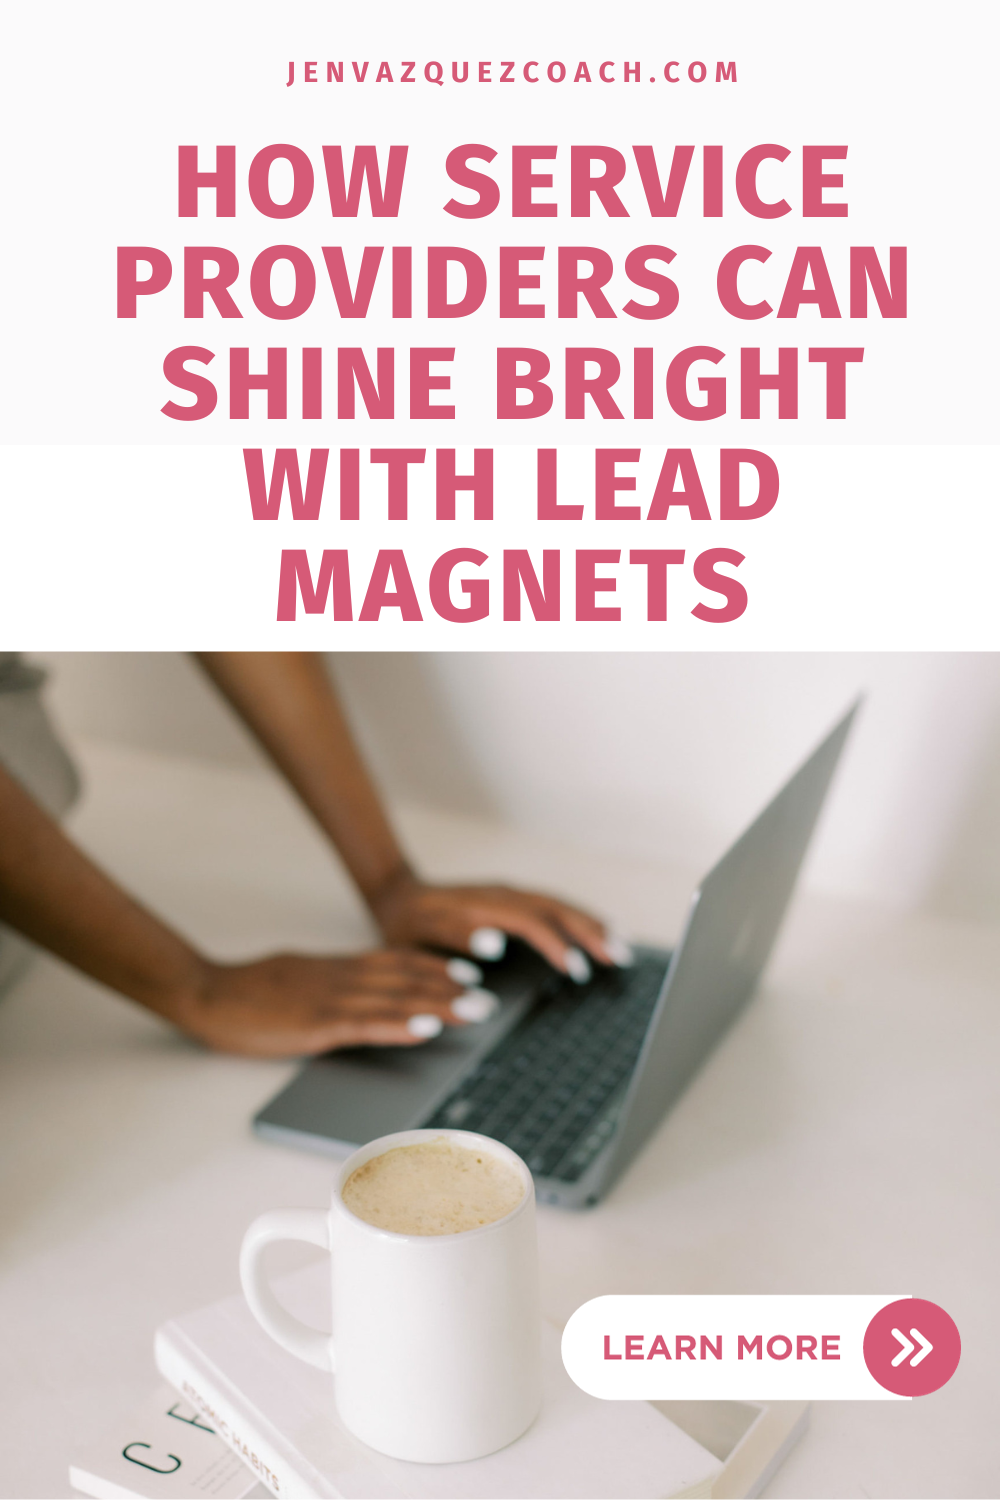 How Service Providers Can Shine Bright with Lead Magnets by Jen Vazquez Media jenvazquezcoach.com